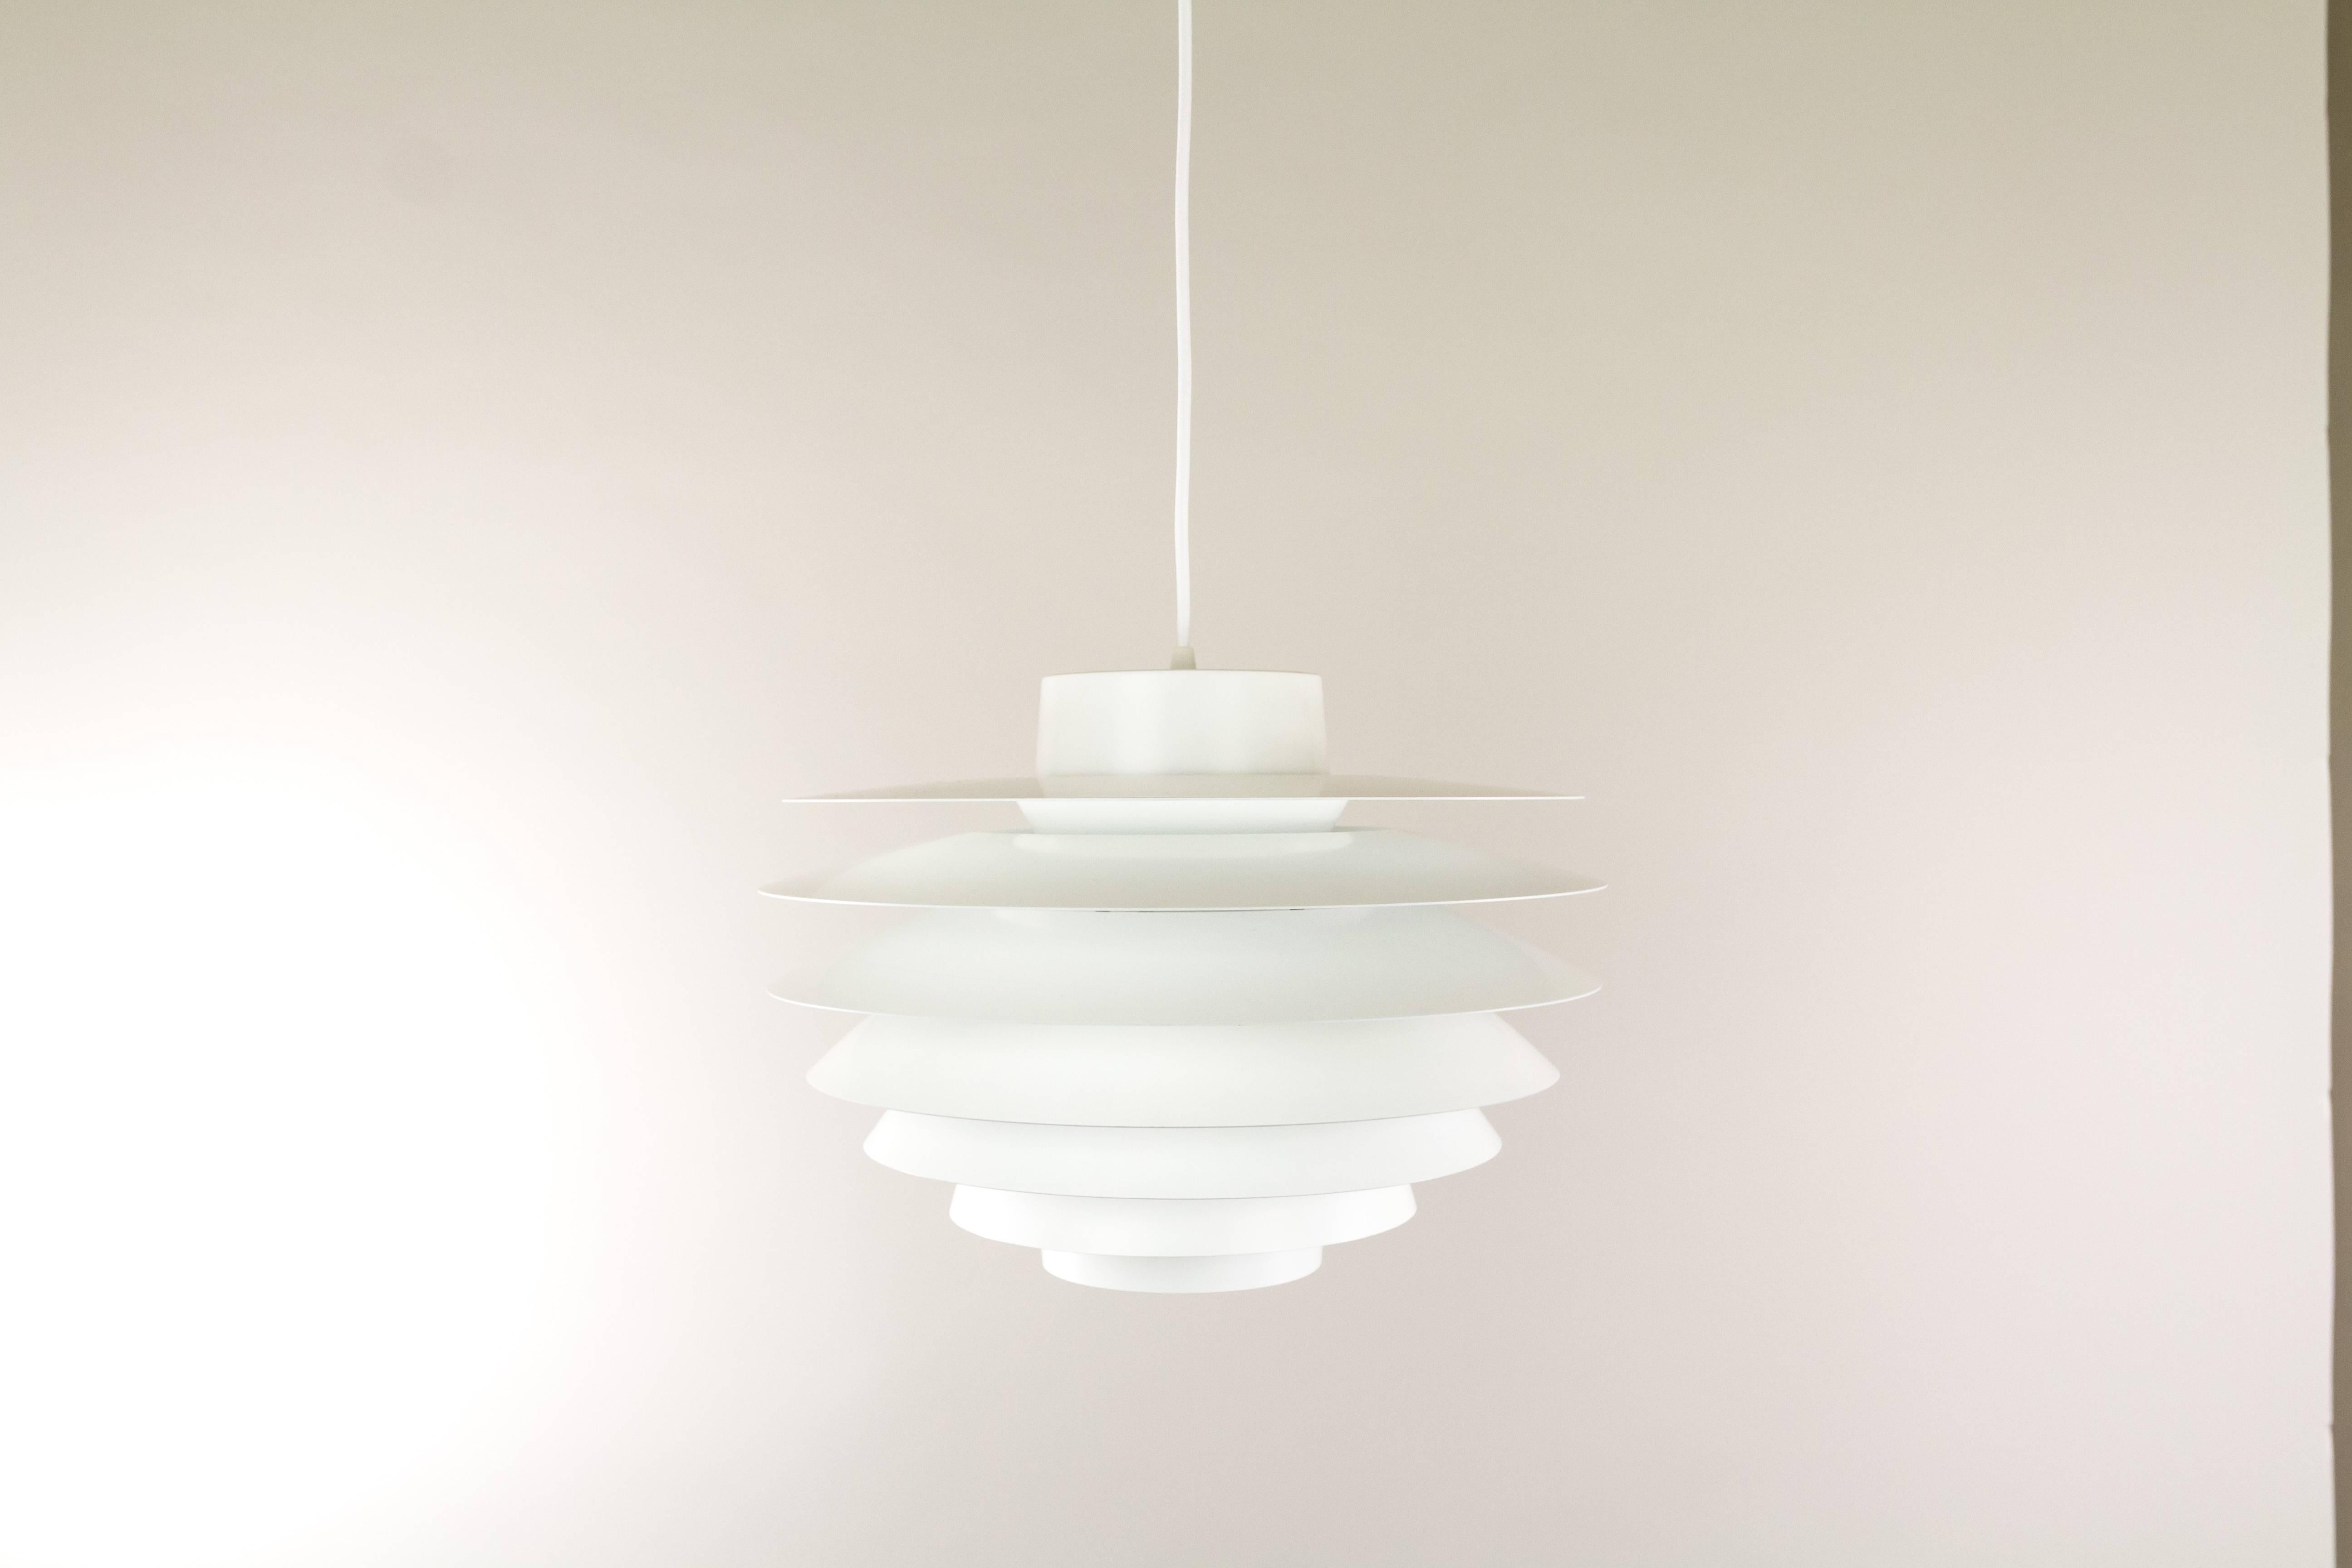 This pendant, model Verona was designed by Svend Middelboe in the 1970s and manufactured by the Danish lighting company Nordisk Solar. It is made from white lacquered metal and consists of seven shades.

A page from a Dutch lighting catalogue from